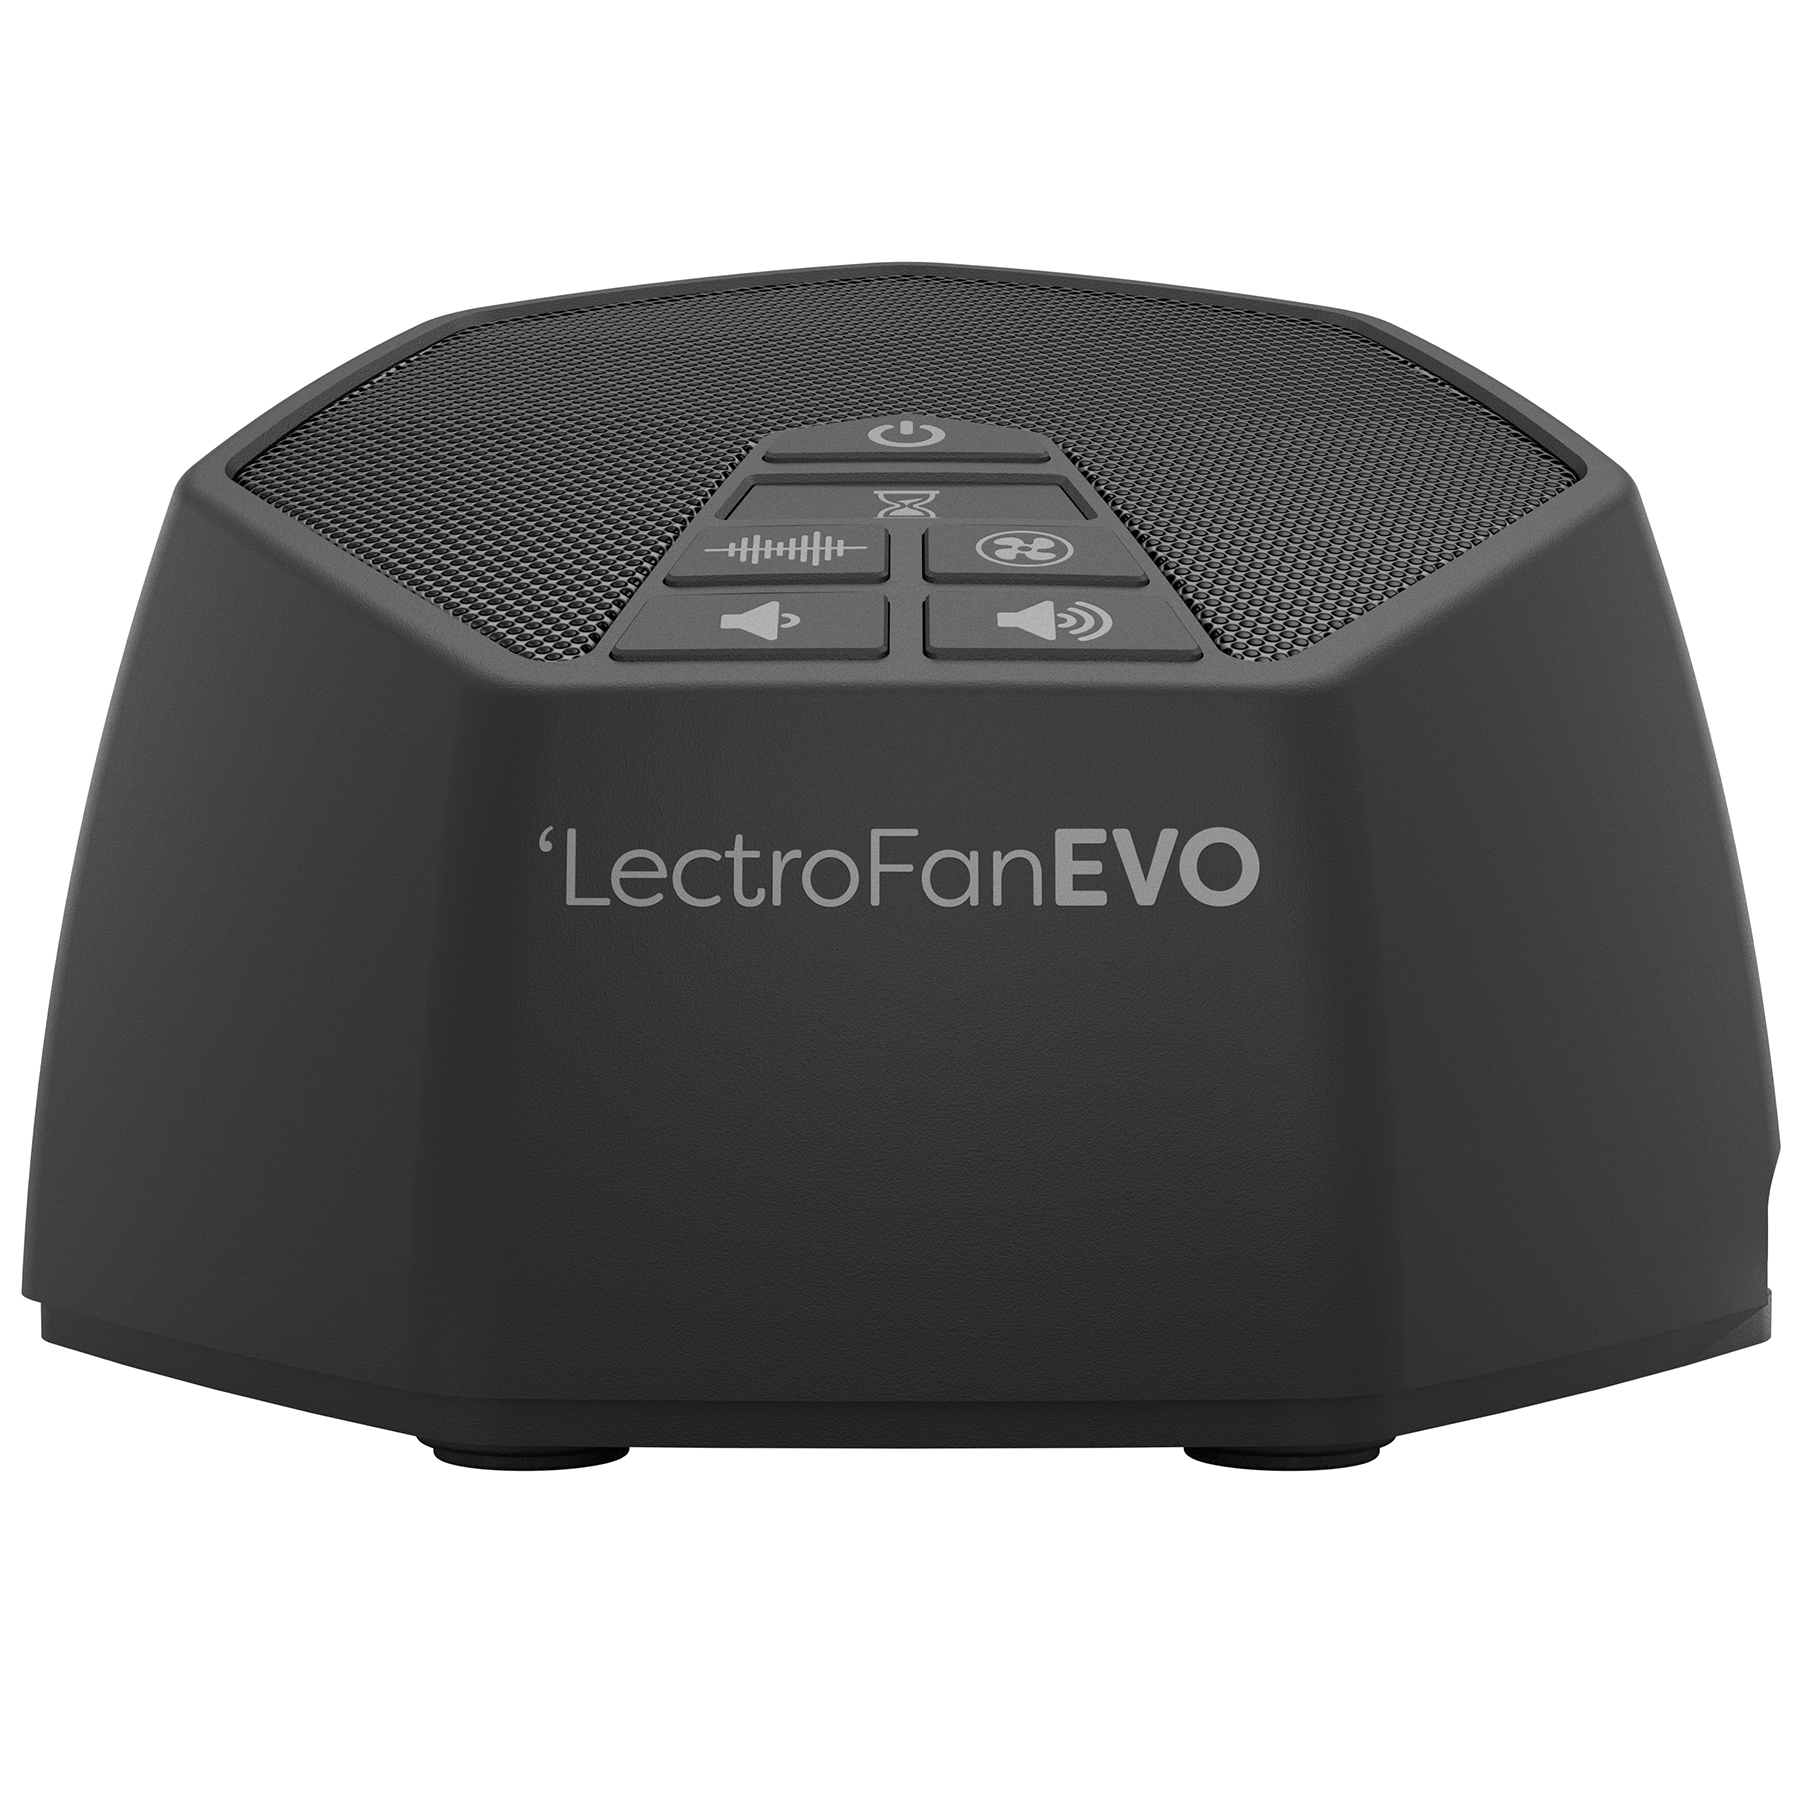 LectroFan EVO: Sound & Noise Machine For Sleep, Rest and Relaxation - Black - image 1 of 5